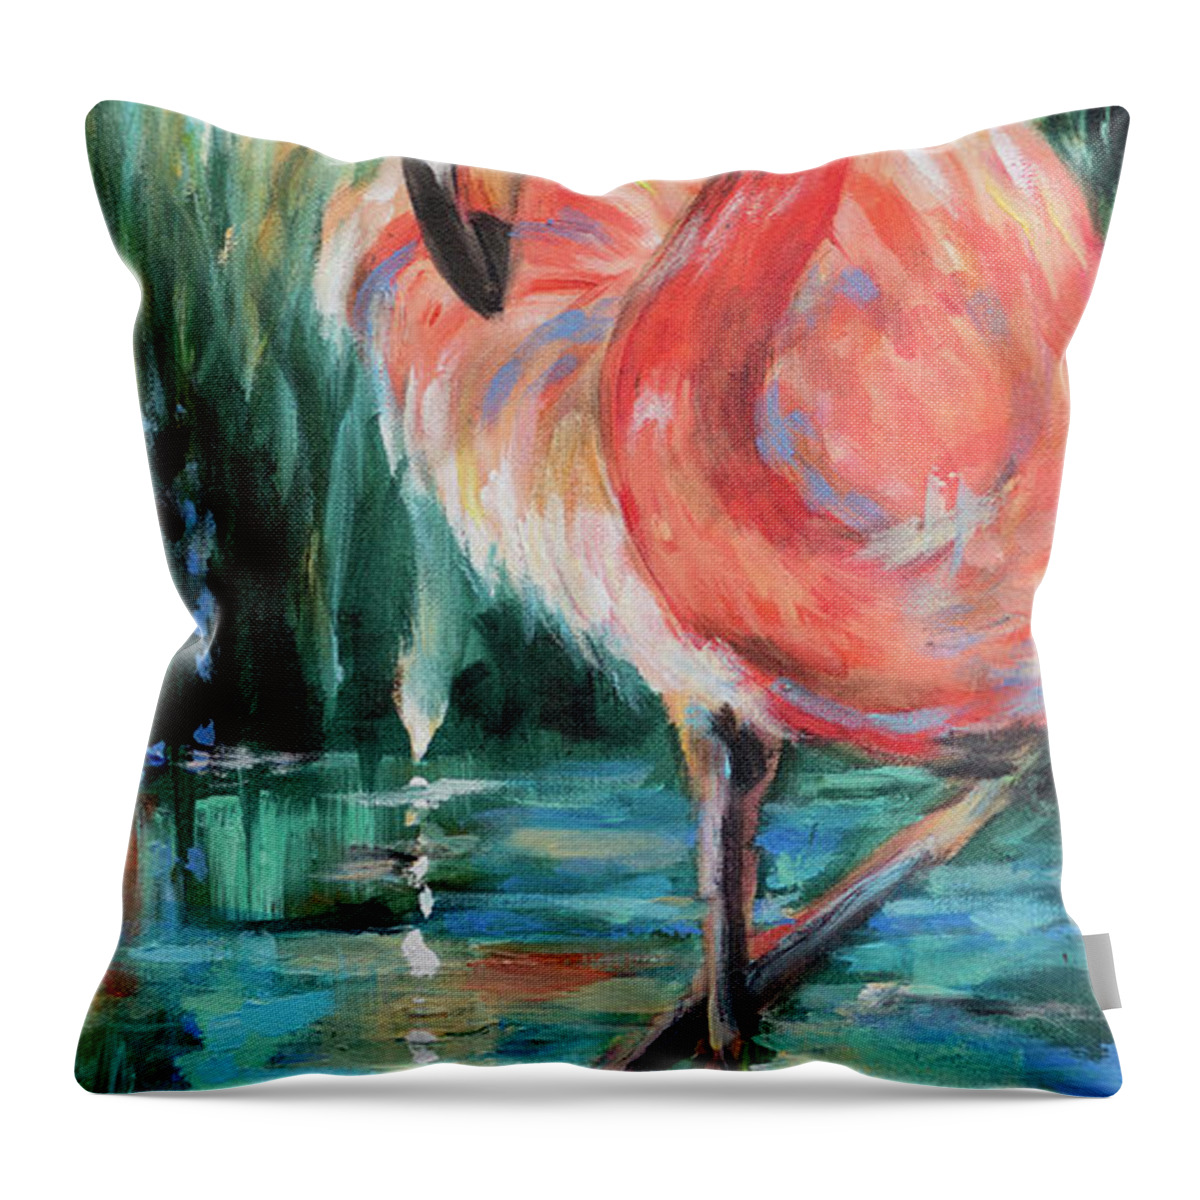 Ocean Throw Pillow featuring the painting Coral Plumes by Linda Olsen